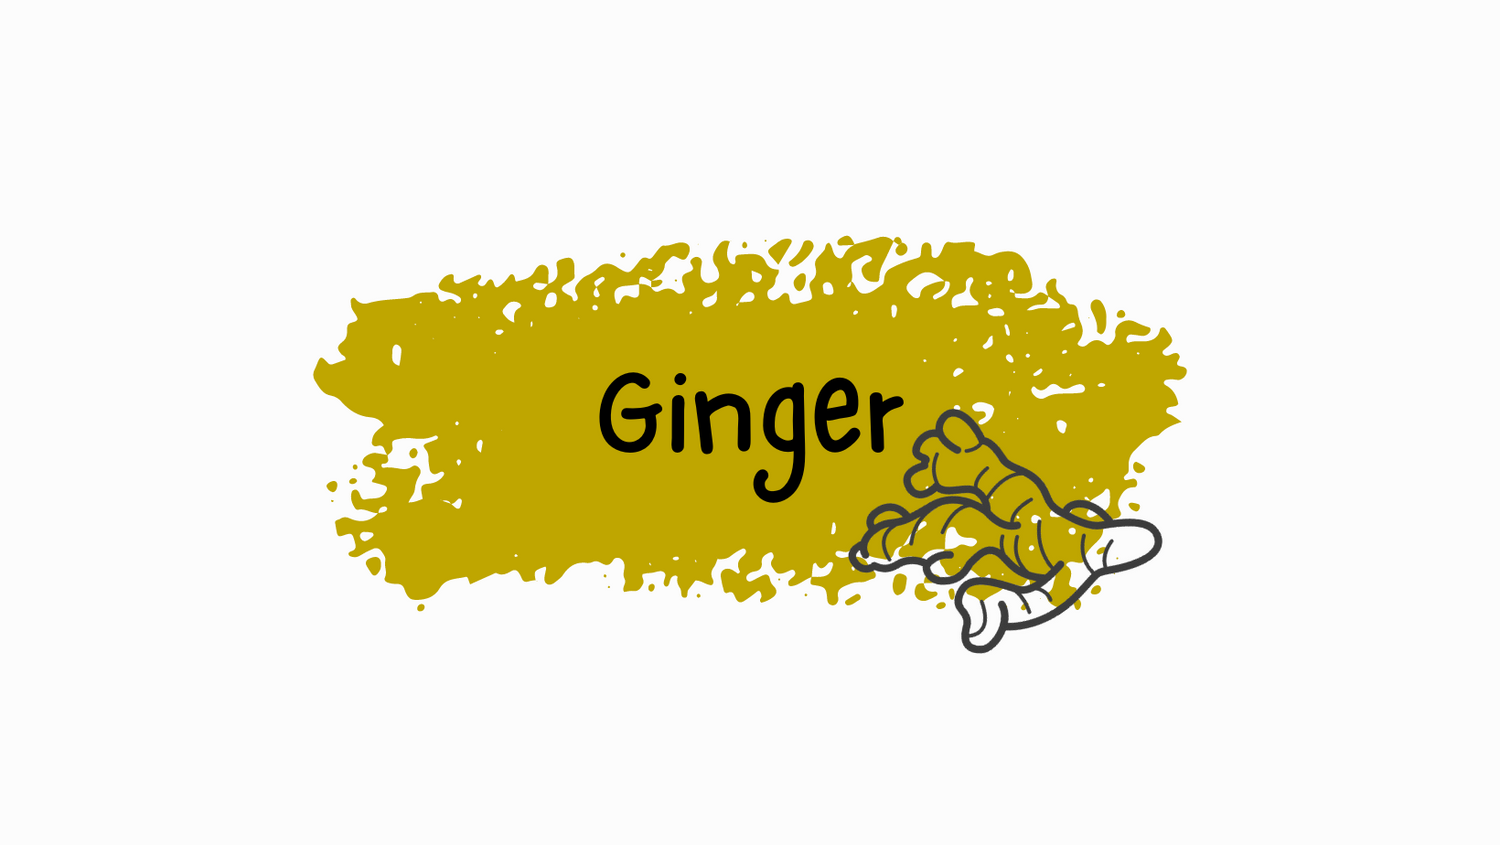 Ginger coloured splash of paint with whole ginger root cartoon drawing superimposed